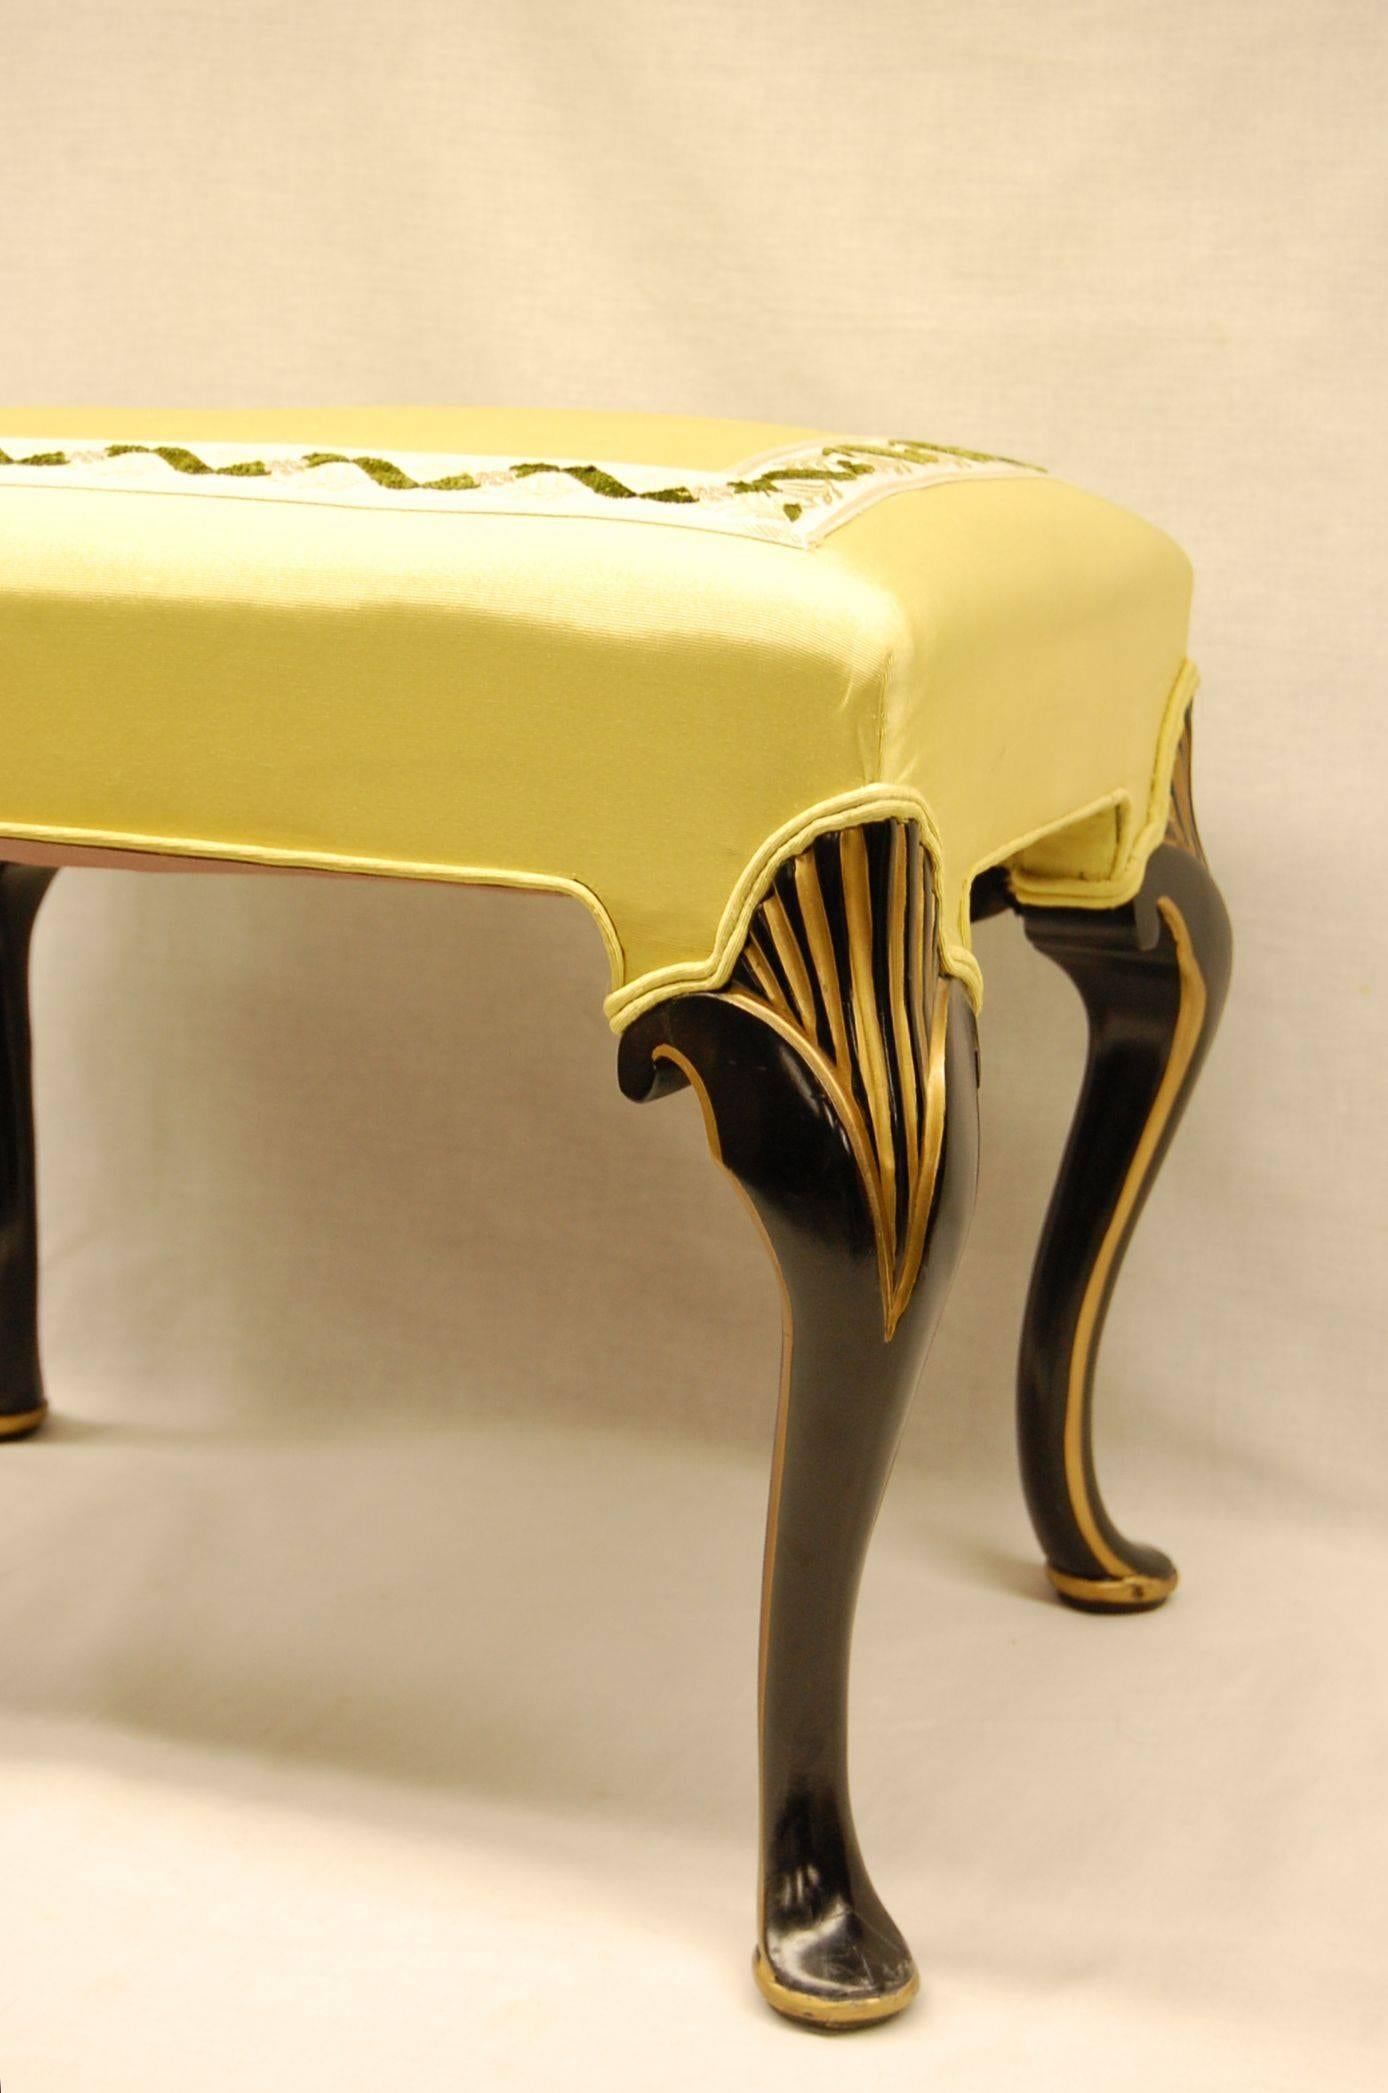 Bench in excellent condition covered in yellow moire fabric with a braid on the top surface. Black painted legs with gold accents.